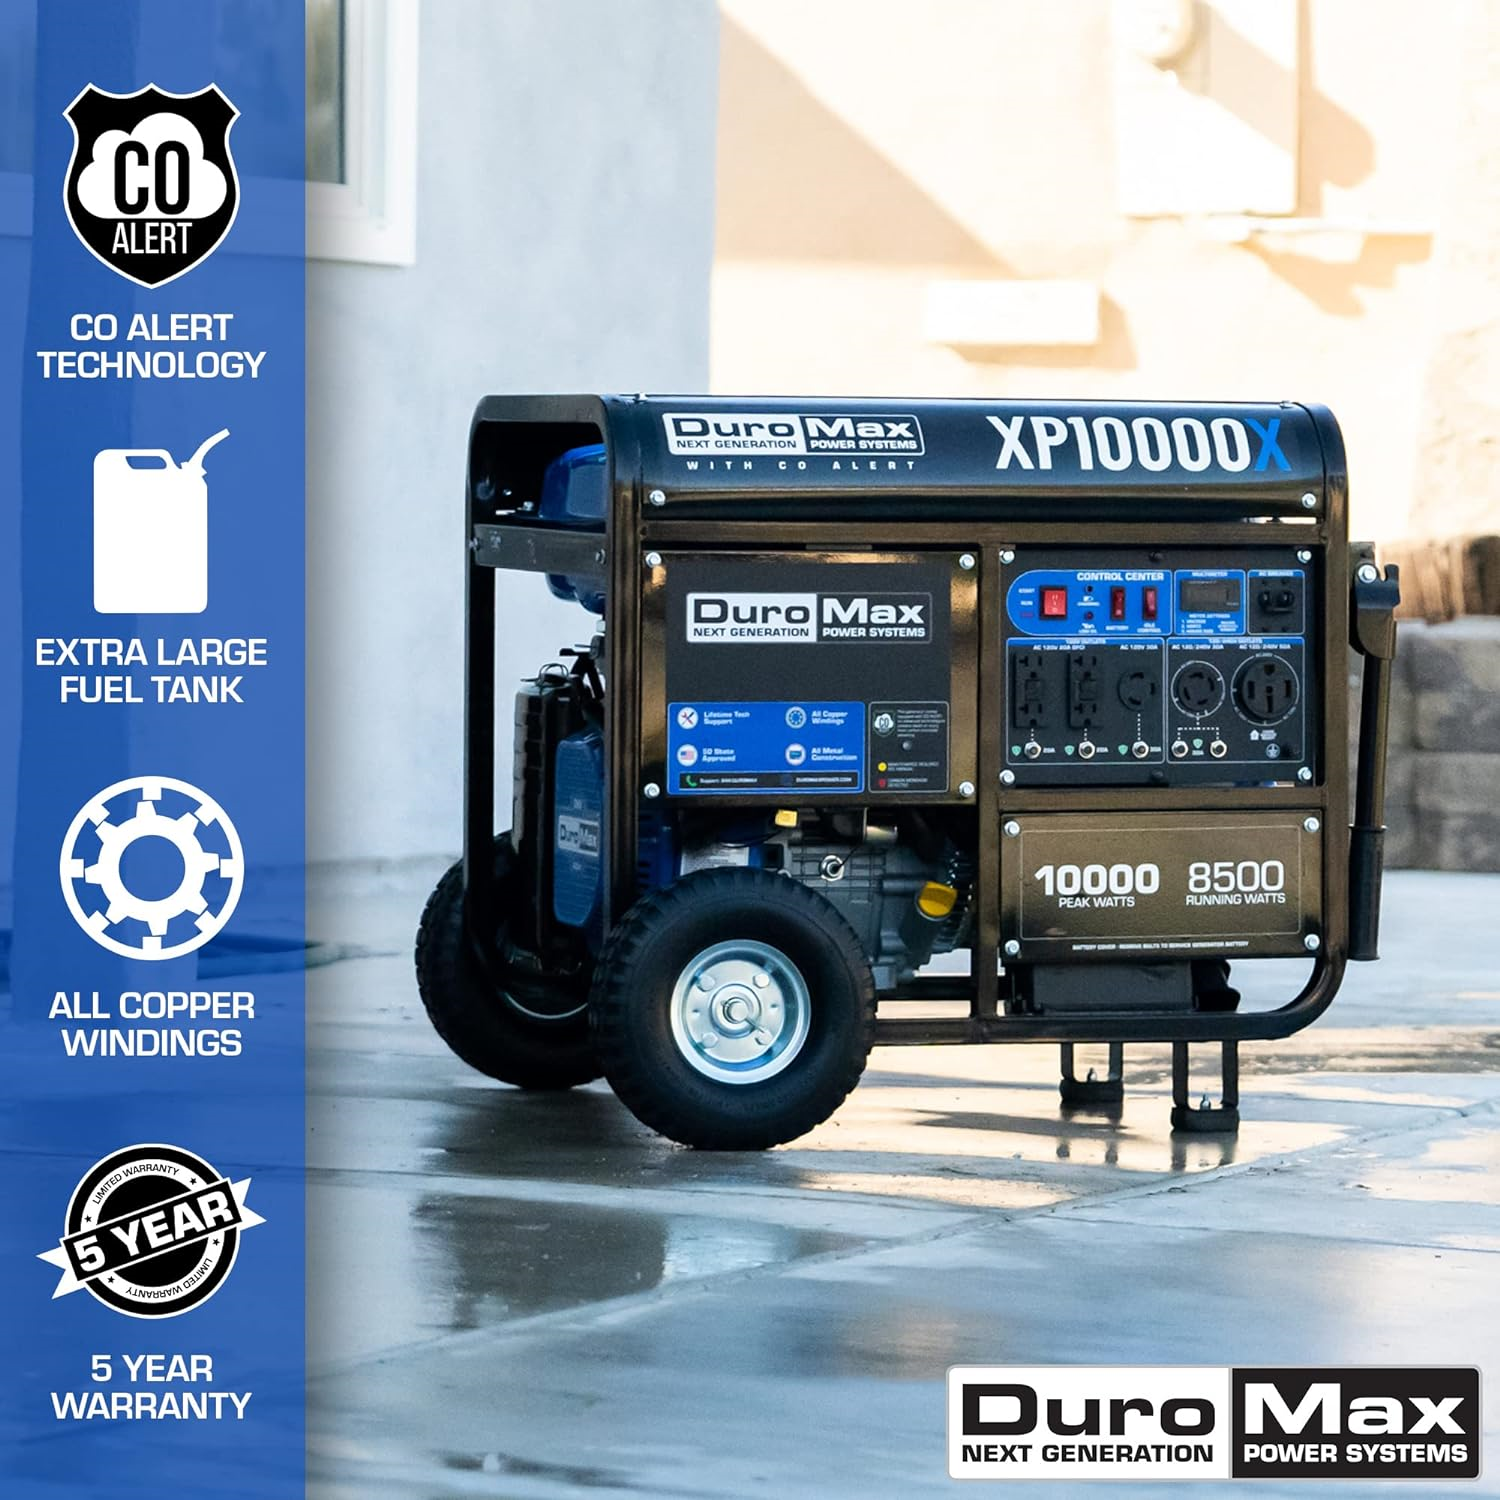 DuroMax XP10000X 8500W/10000W Gas Generator with Electric Start and CO Alert New